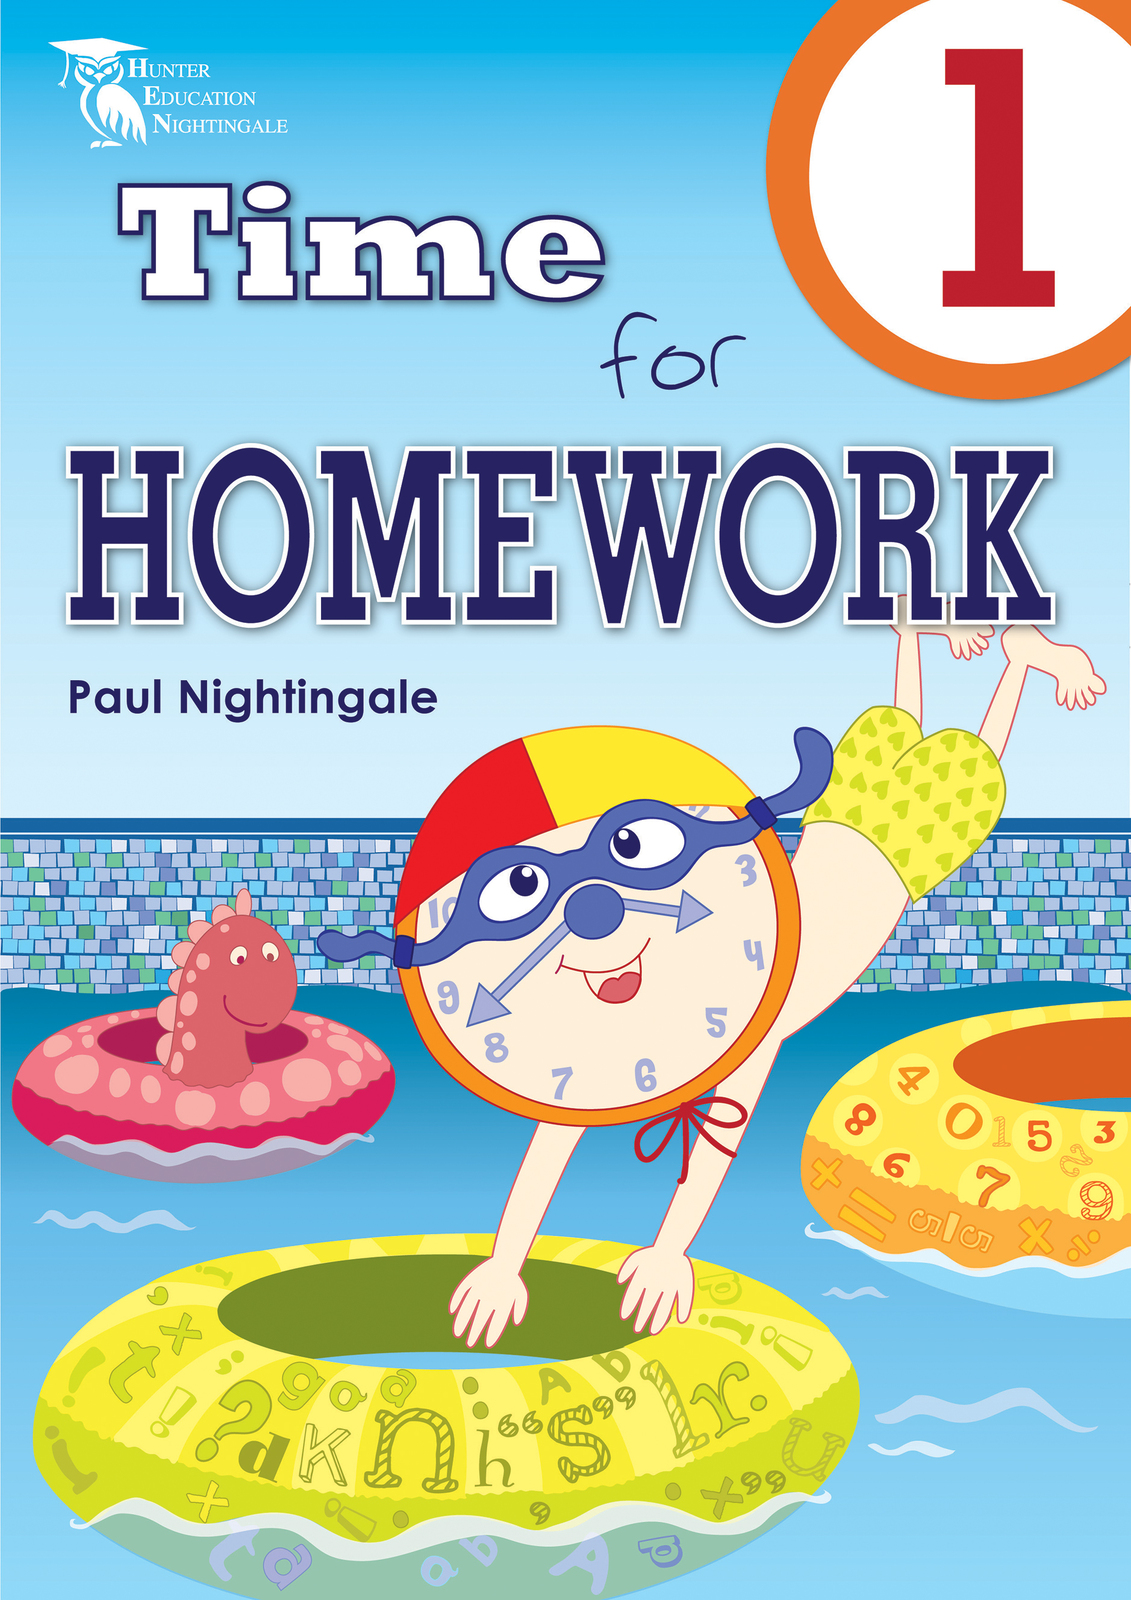 homework time by